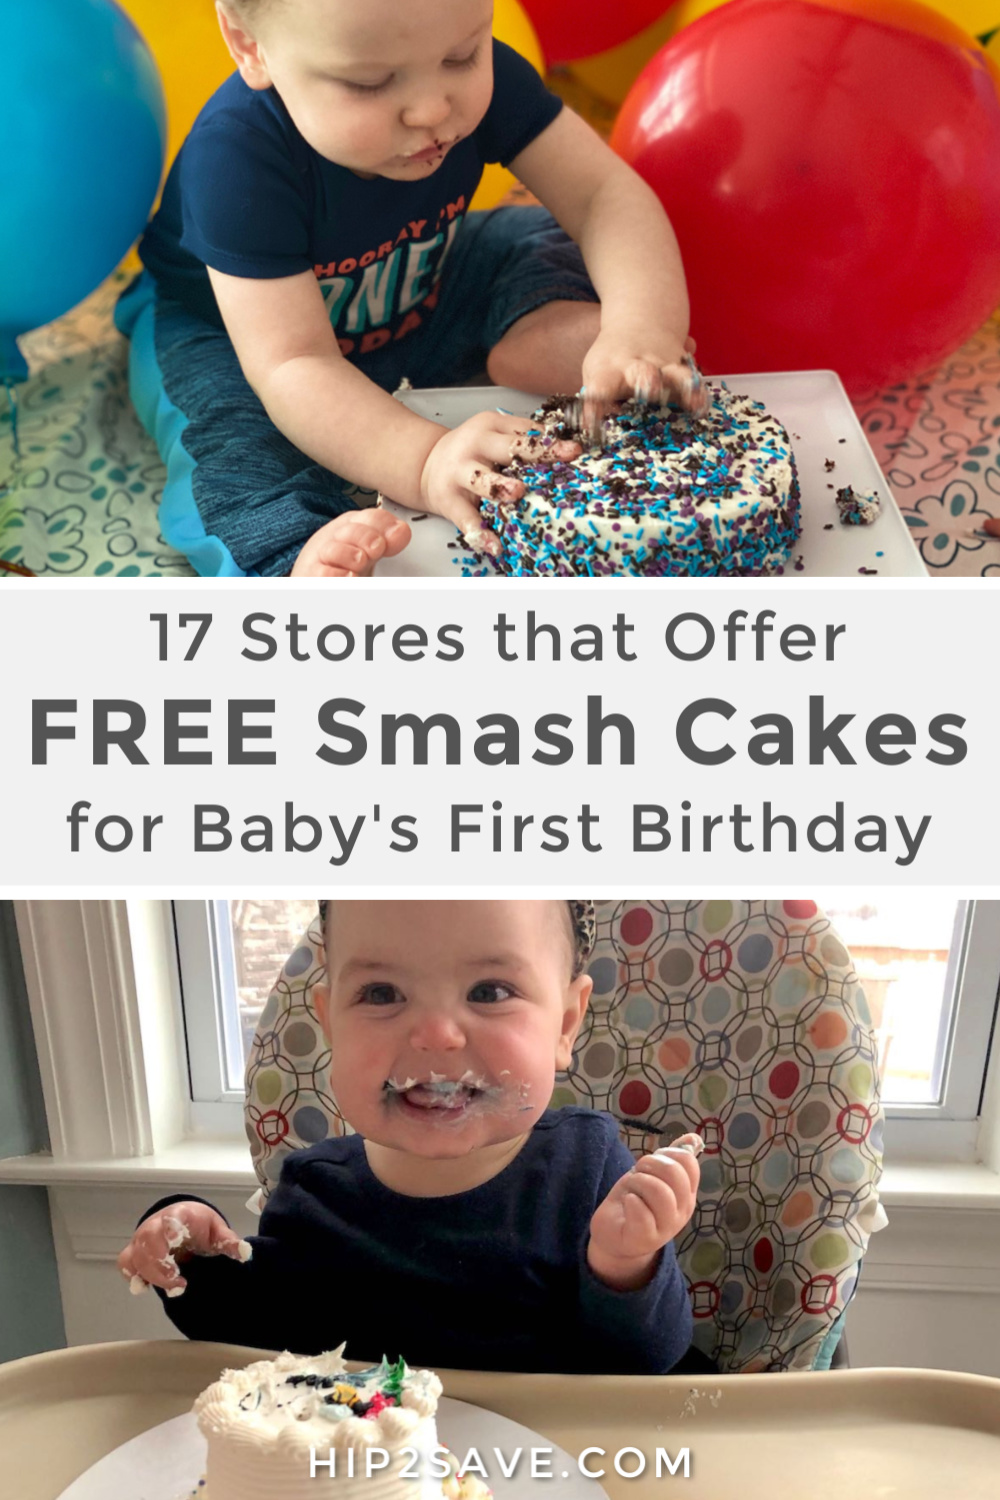 19-stores-offer-free-smash-cakes-for-baby-s-first-birthday-hip2save